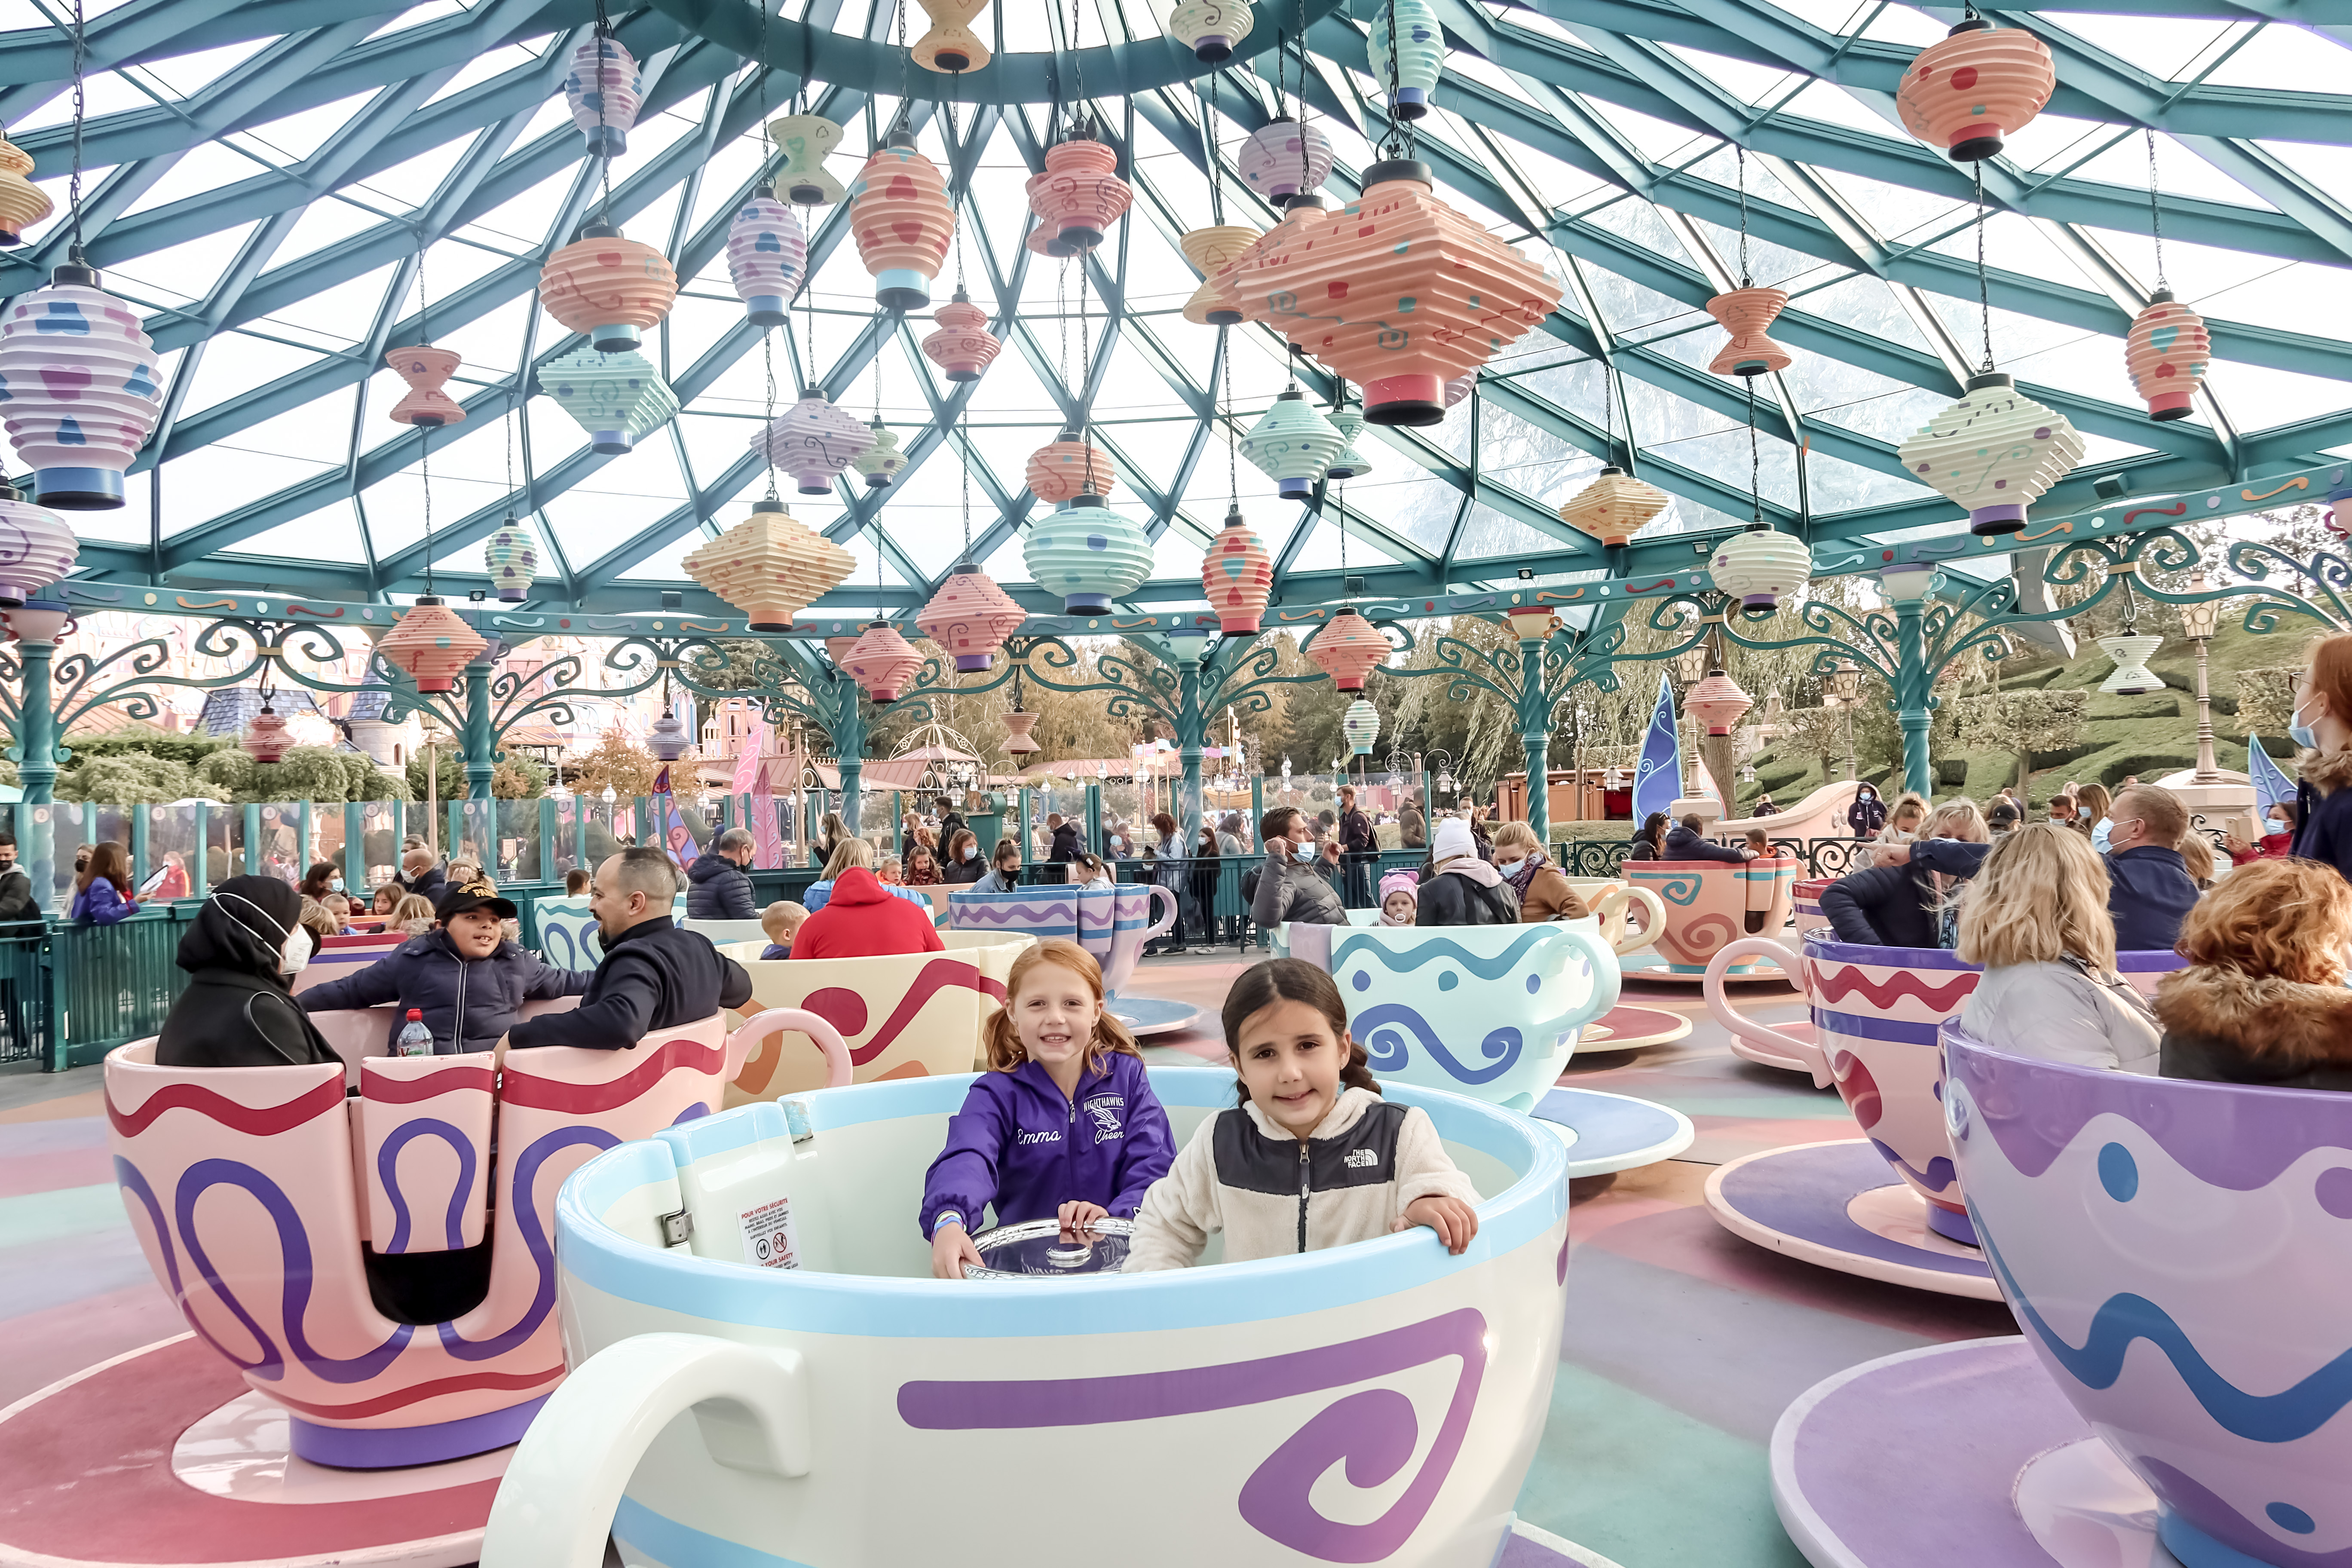 Mad Hatter Tea Cups - Five Underrated Attractions at Disneyland Paris 